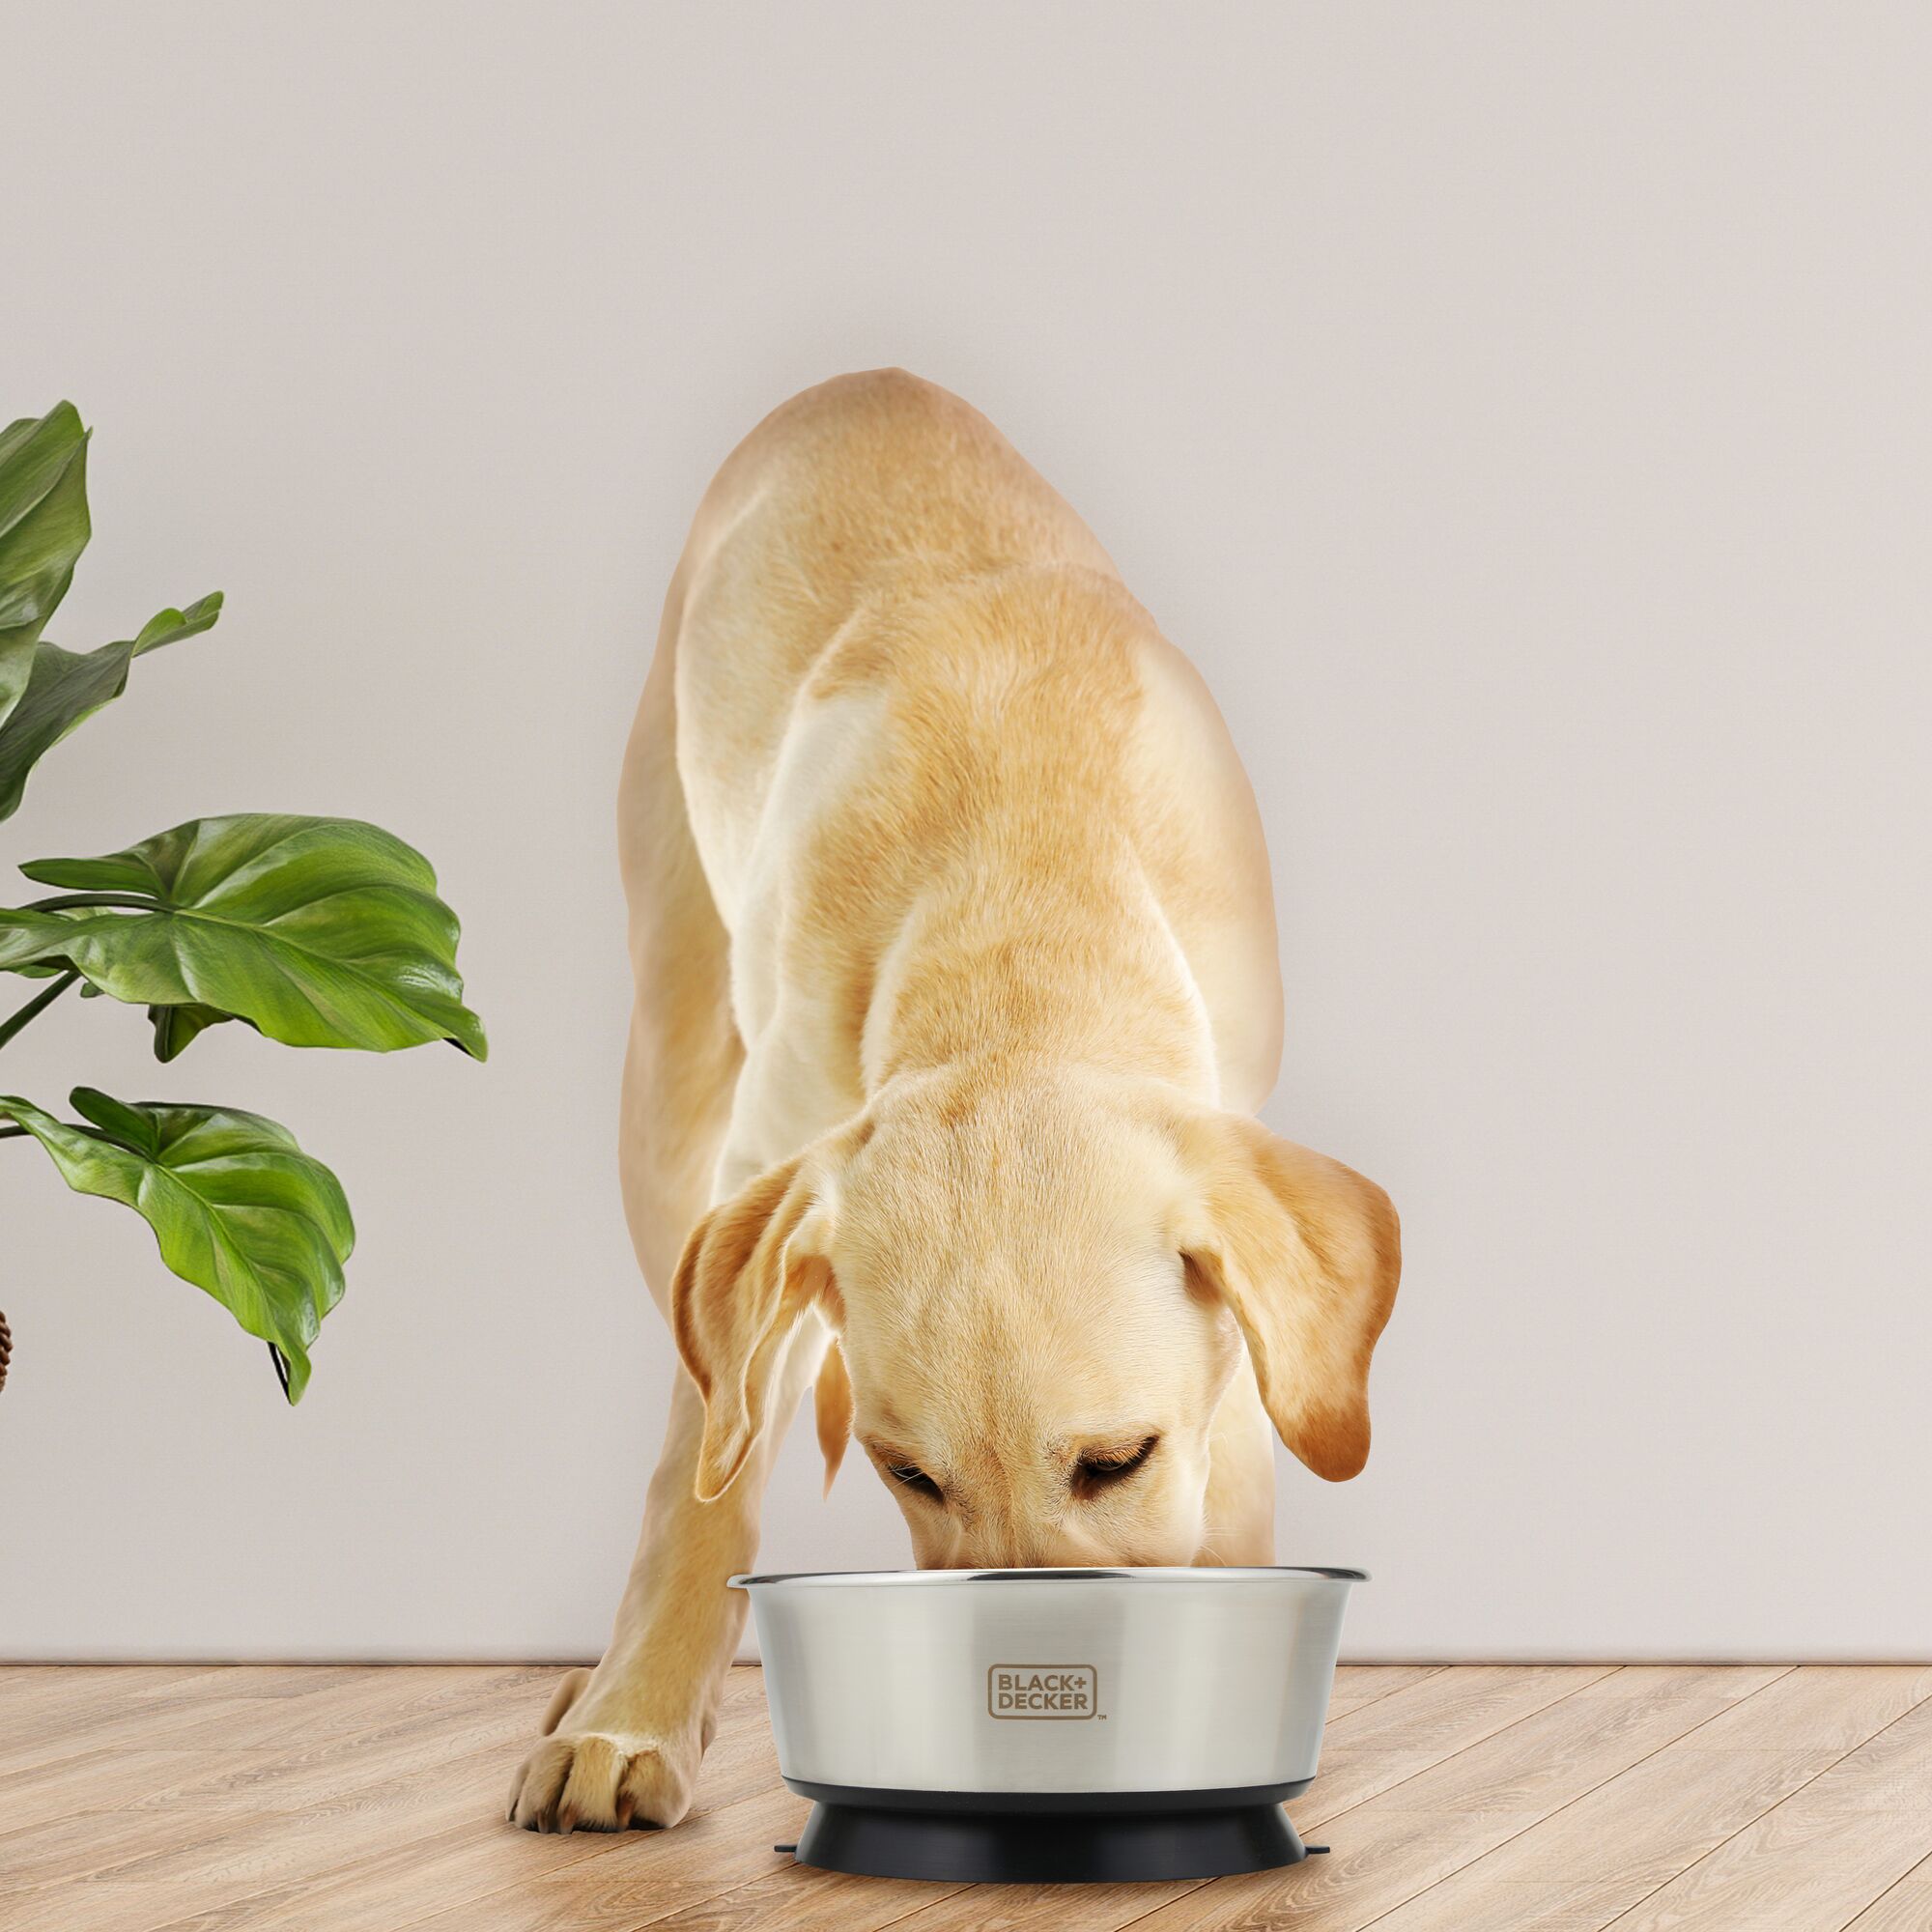 Yellow Labrador dog eating out of a stainless steel dog bowl